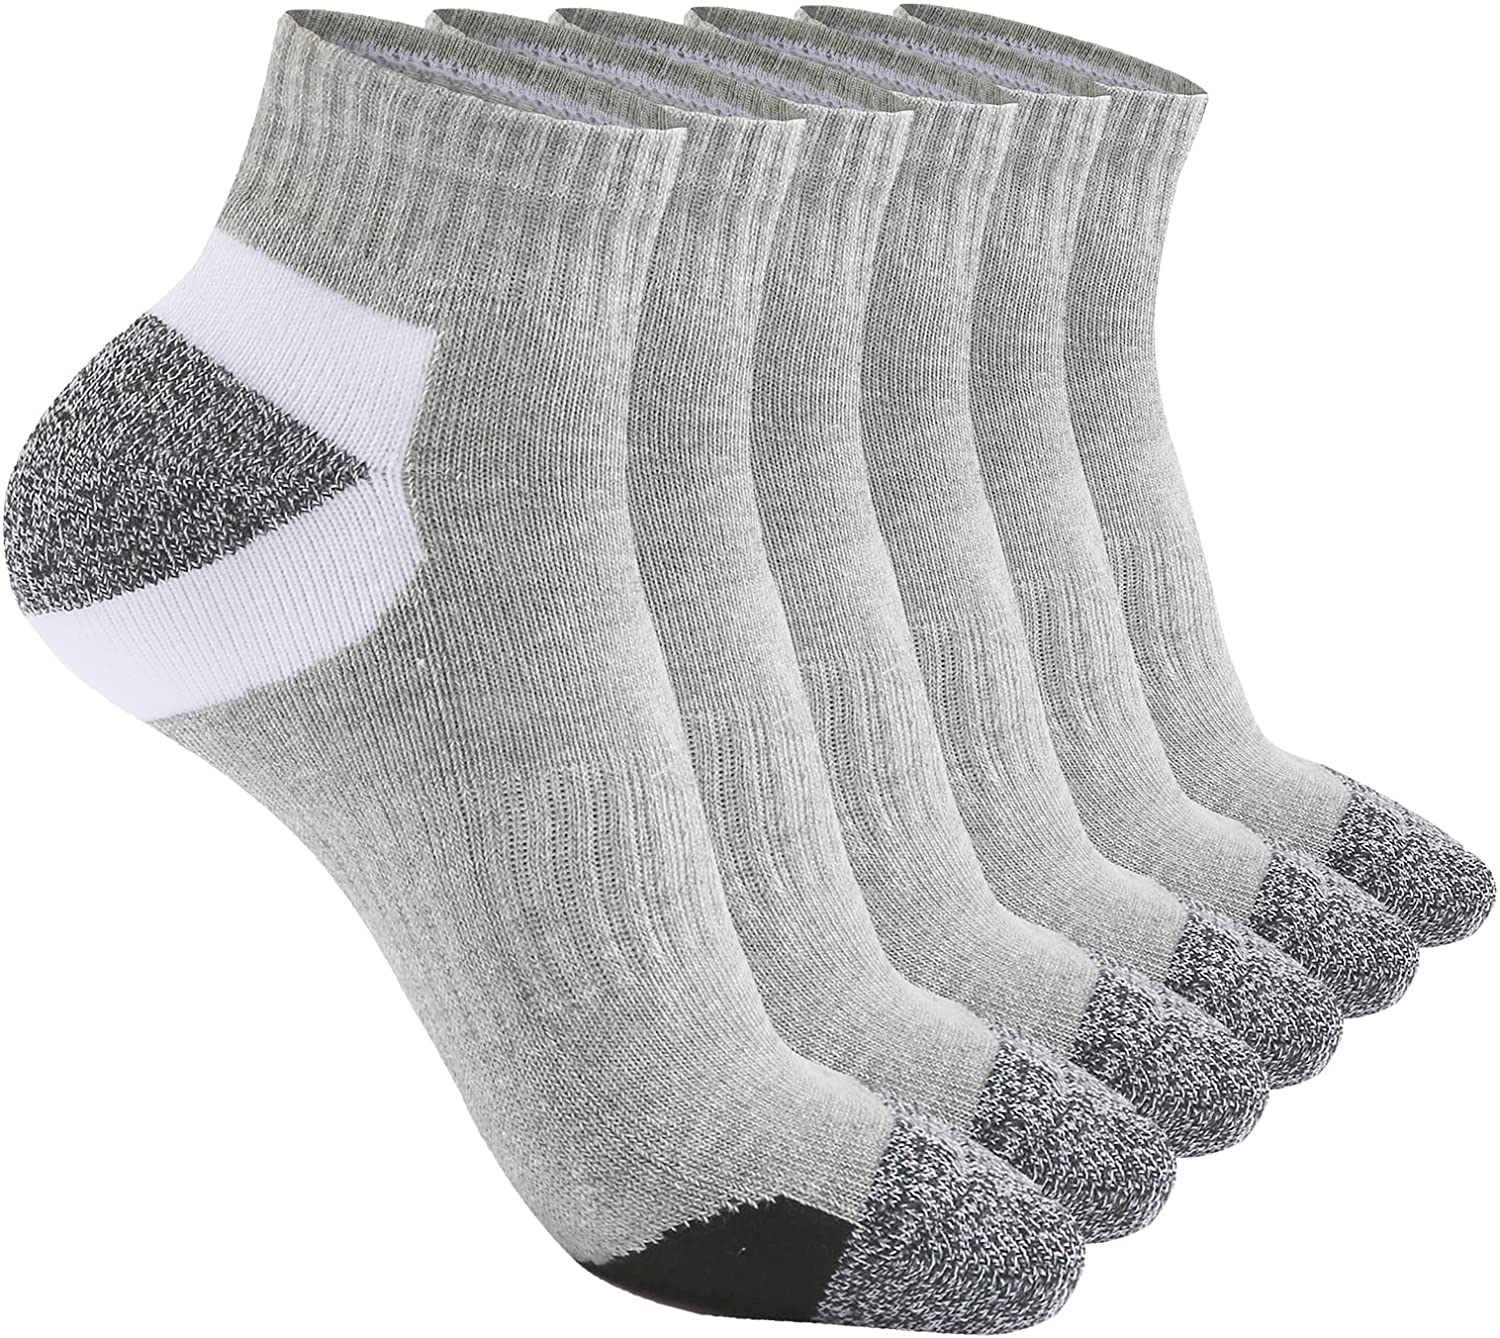 Hepsibah Womens Athletic Ankle Socks Cotton Thick Cushion Low Cut Running  Sport | eBay